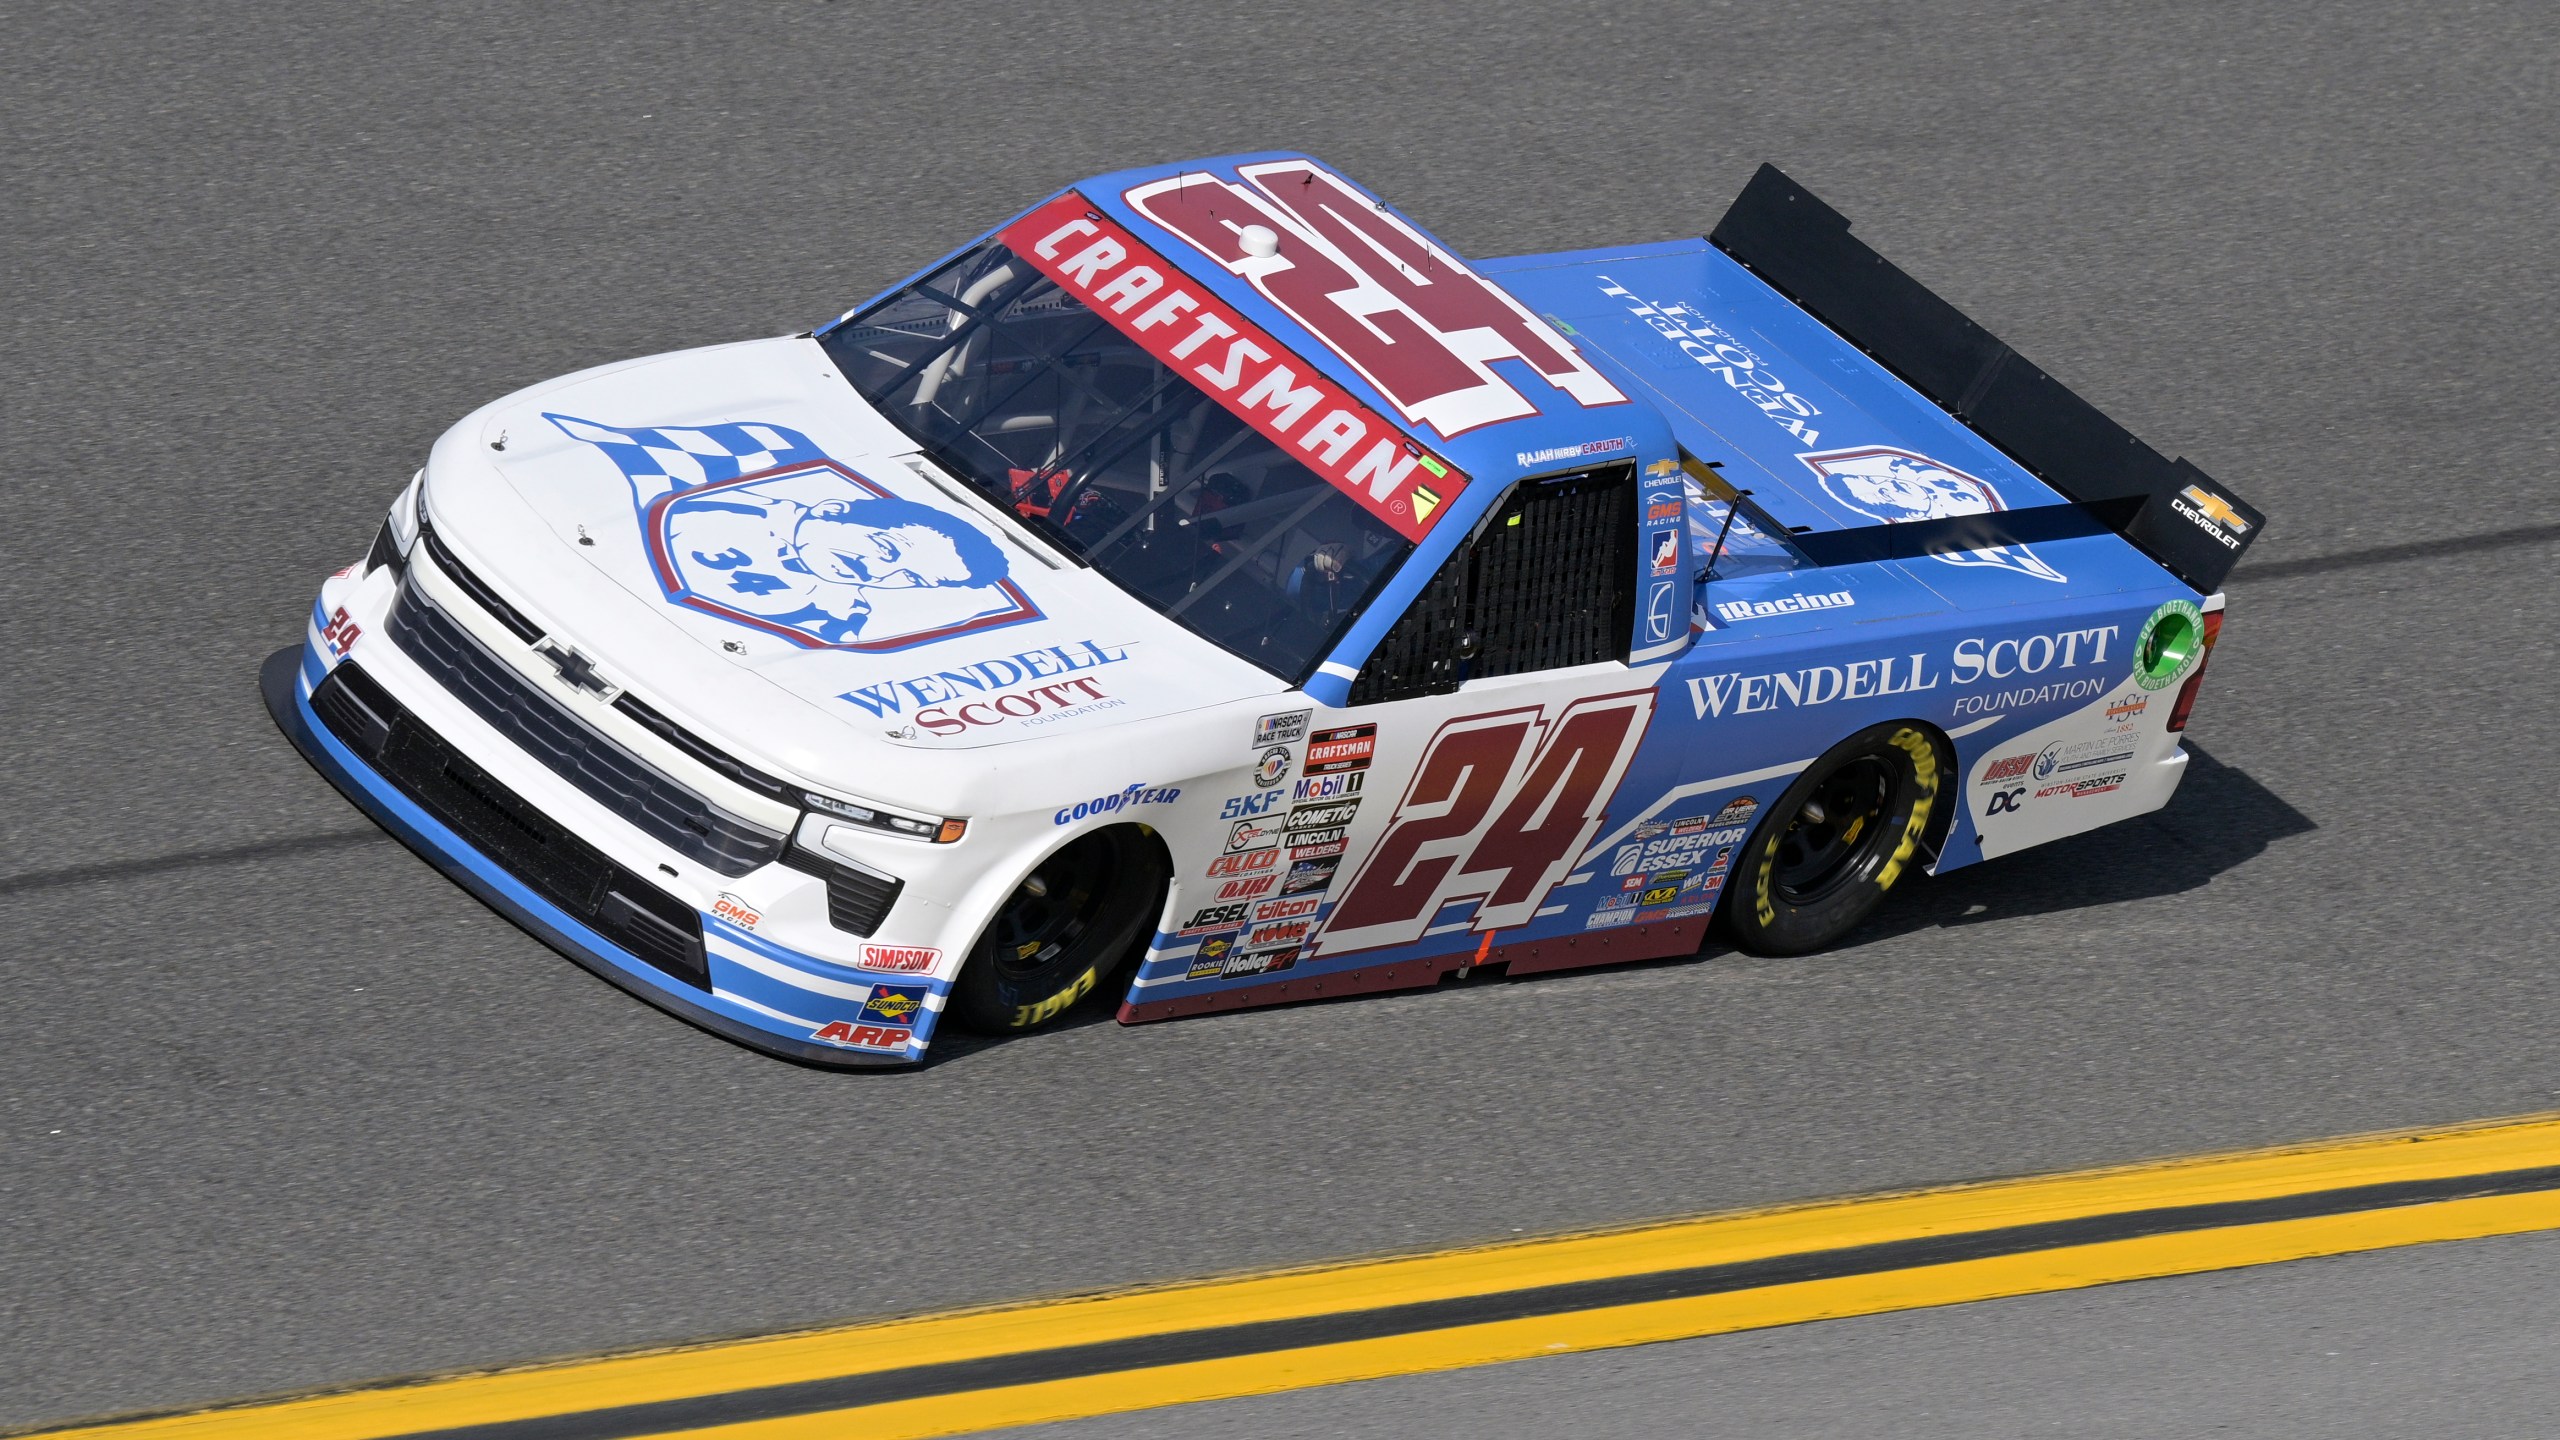 Rajah Caruth (24) during qualifying for a NASCAR truck series auto race at Daytona International Speedway, Friday, Feb. 17, 2023, in Daytona Beach, Fla. The 21-year-old student at Winston-Salem State has cracked into NASCAR's national-level series racing and on Friday, March 1, 2024, won the Truck Series race at Las Vegas Motor Speedway. (AP Photo/Phelan M. Ebenhack)